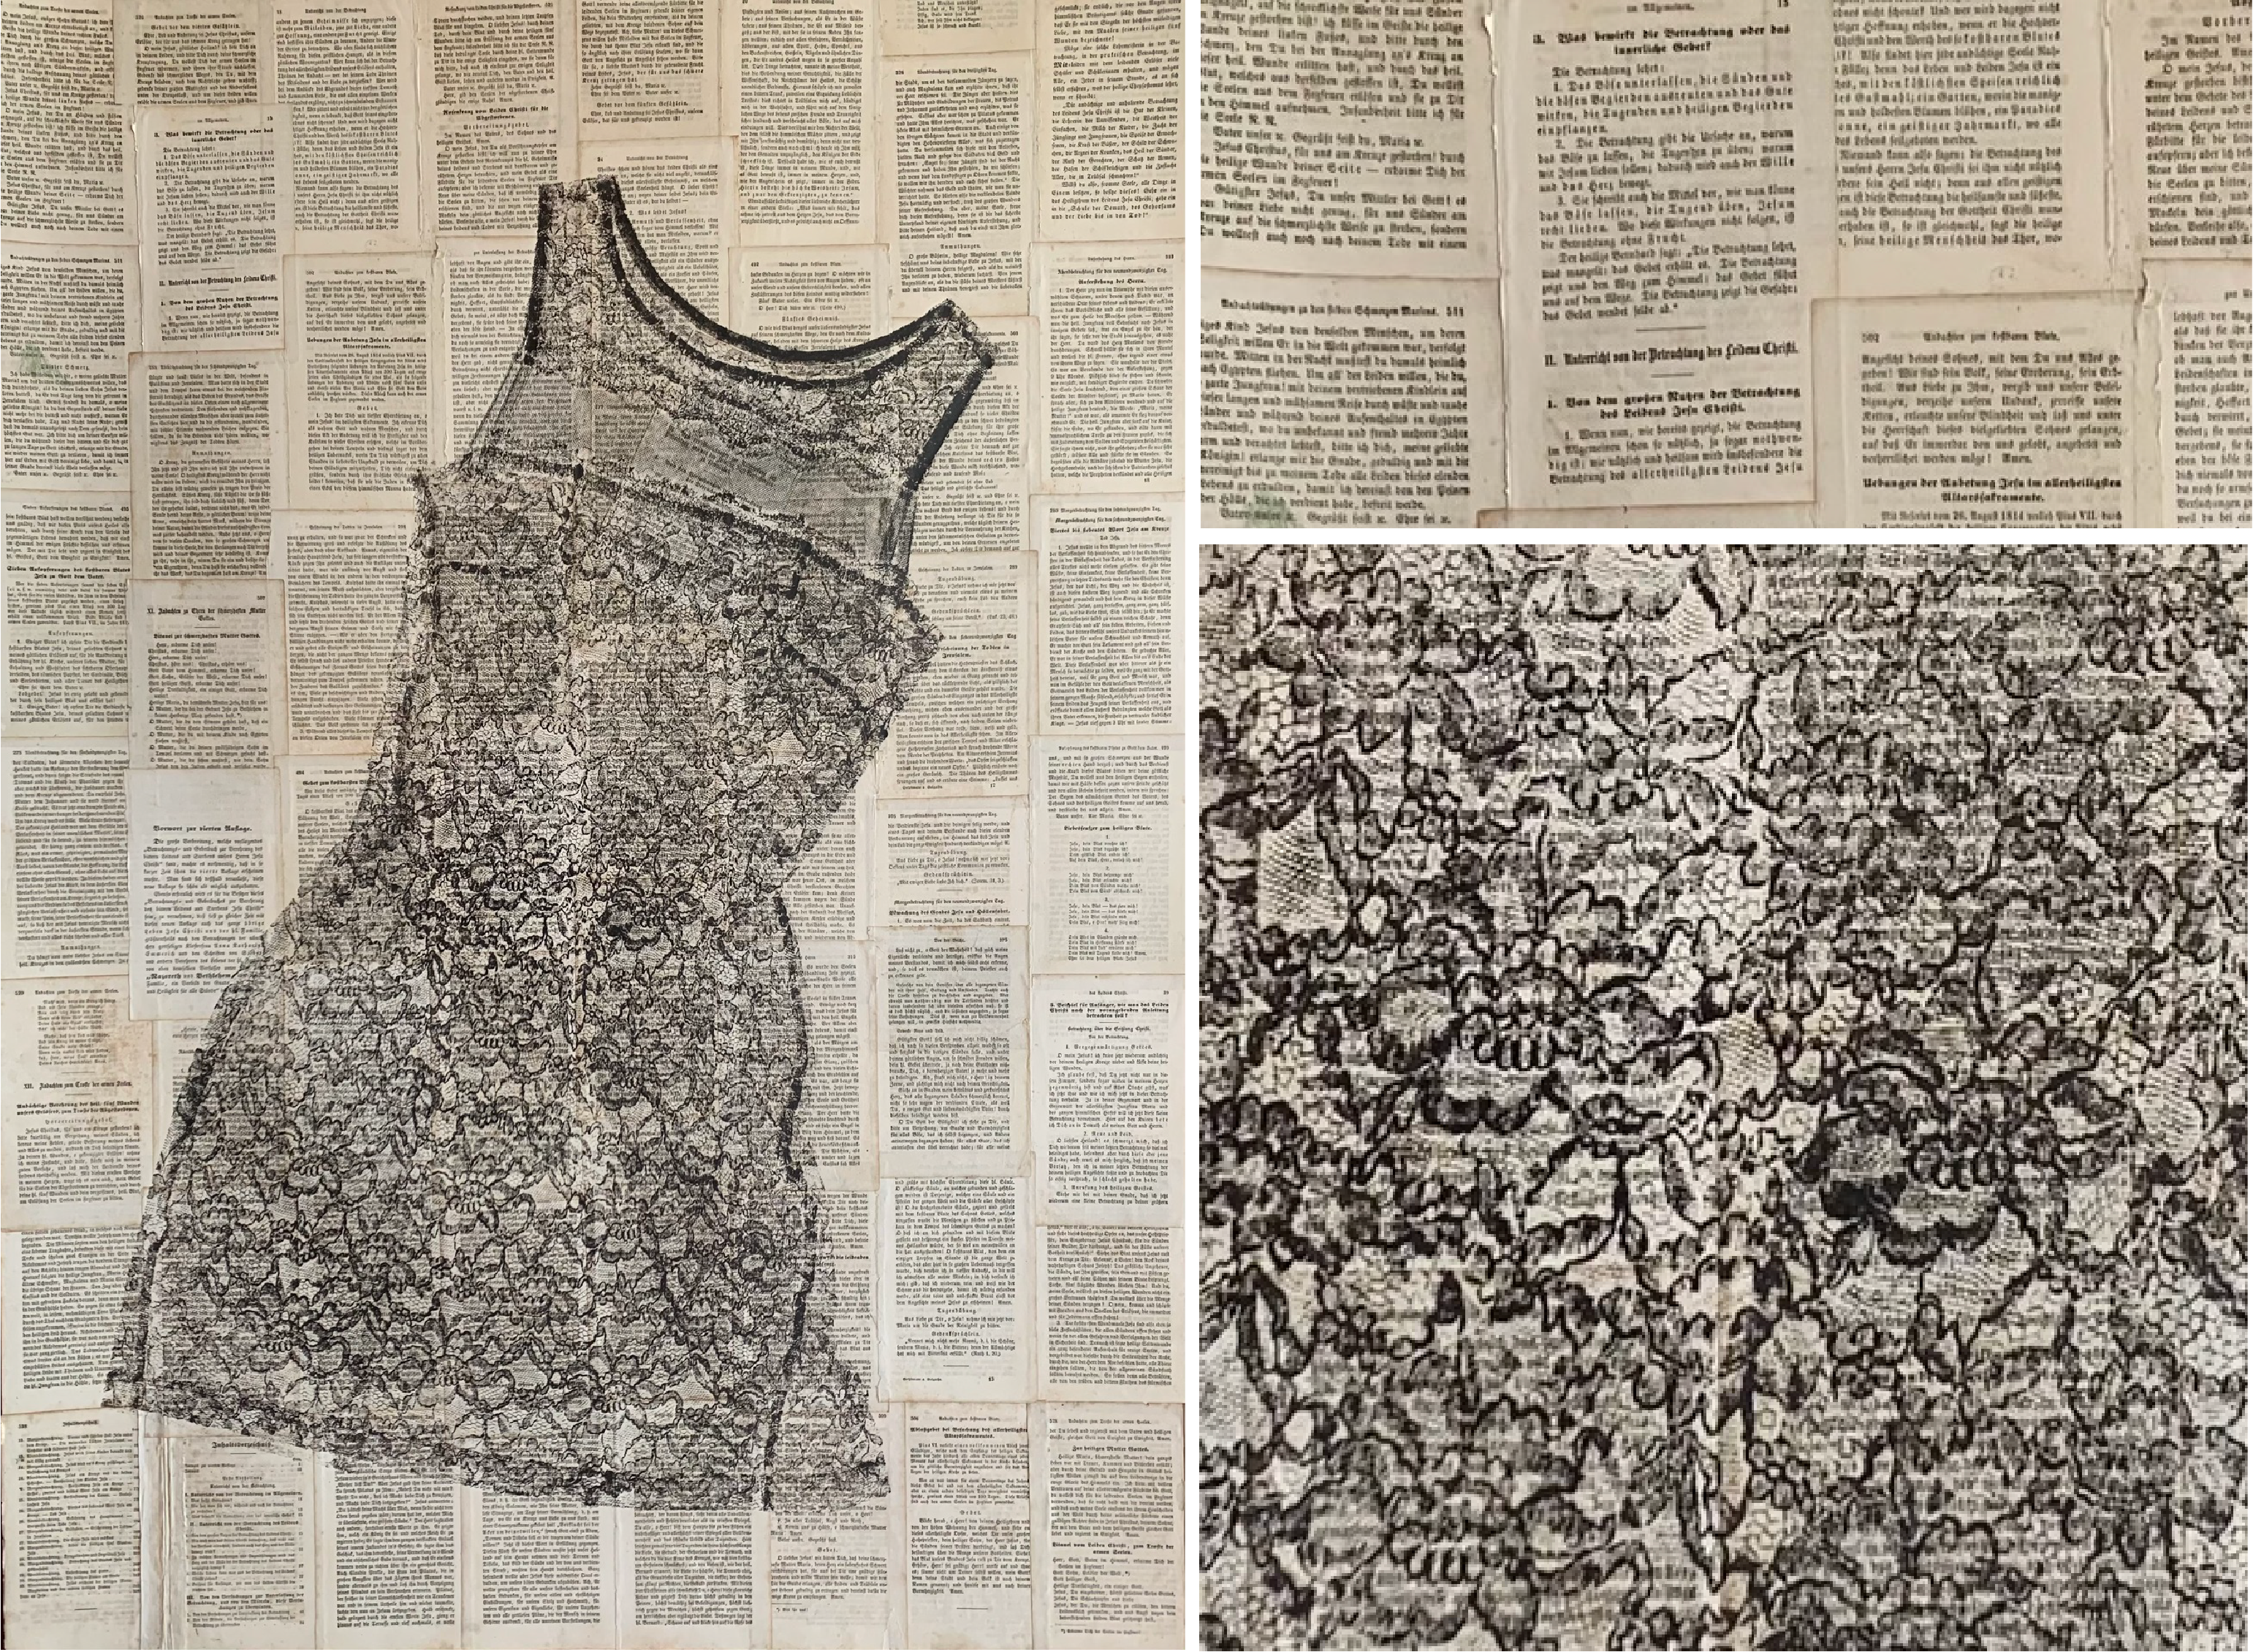 Andra Broekelschen The Little Black Dress, 2019 monotype print oil-based ink on old prayer book pages 43 x 31” Image use courtesy of the artist